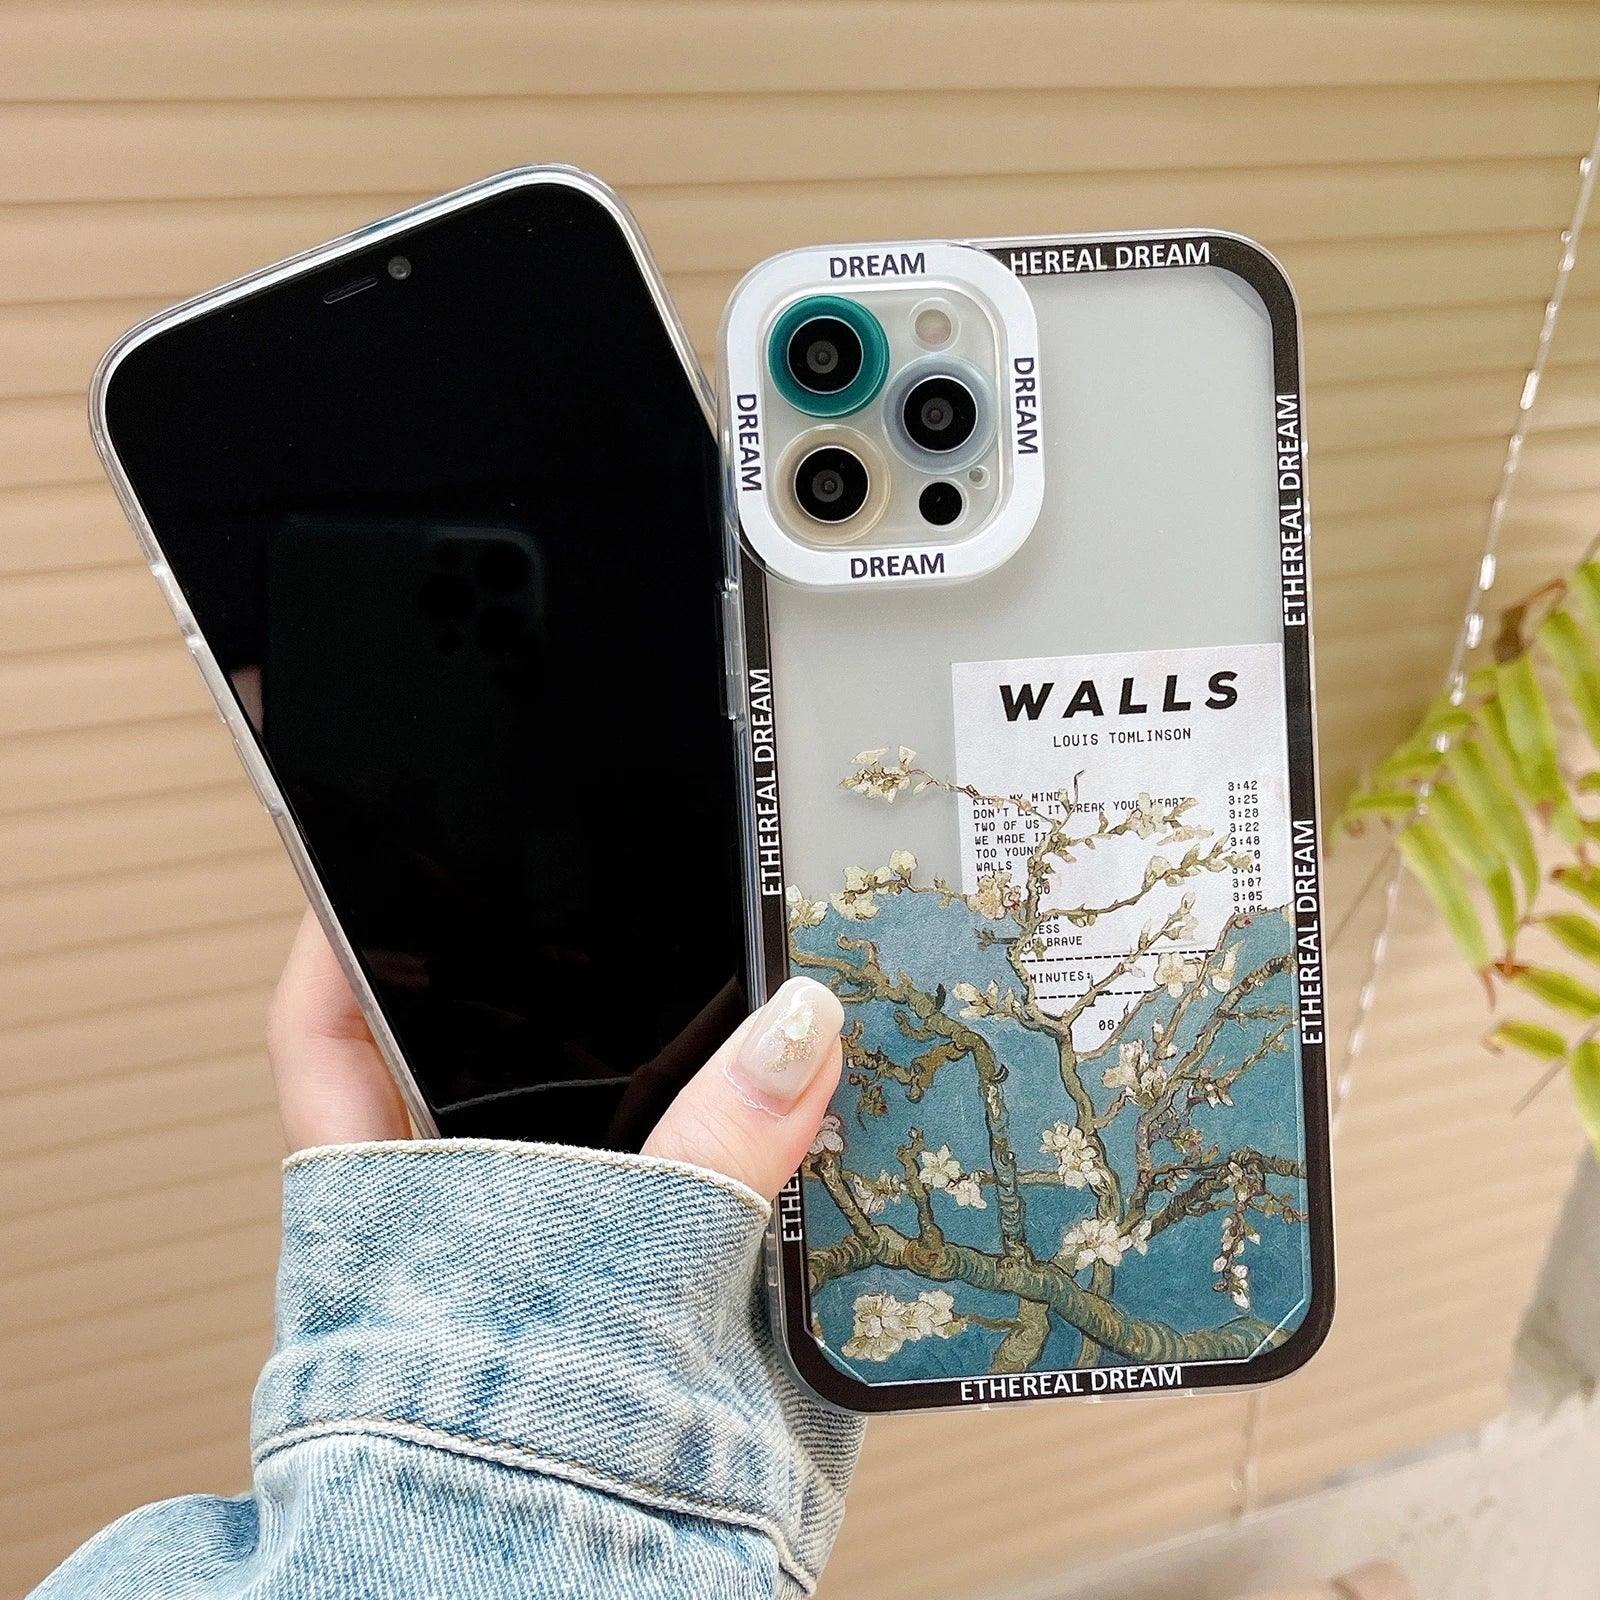 Cute Art Painting Design Phone Cases for iPhone 7, 8 Plus, X, XR, XS Max, 11, 12, 13, 14 Pro - Covers - Touchy Style .